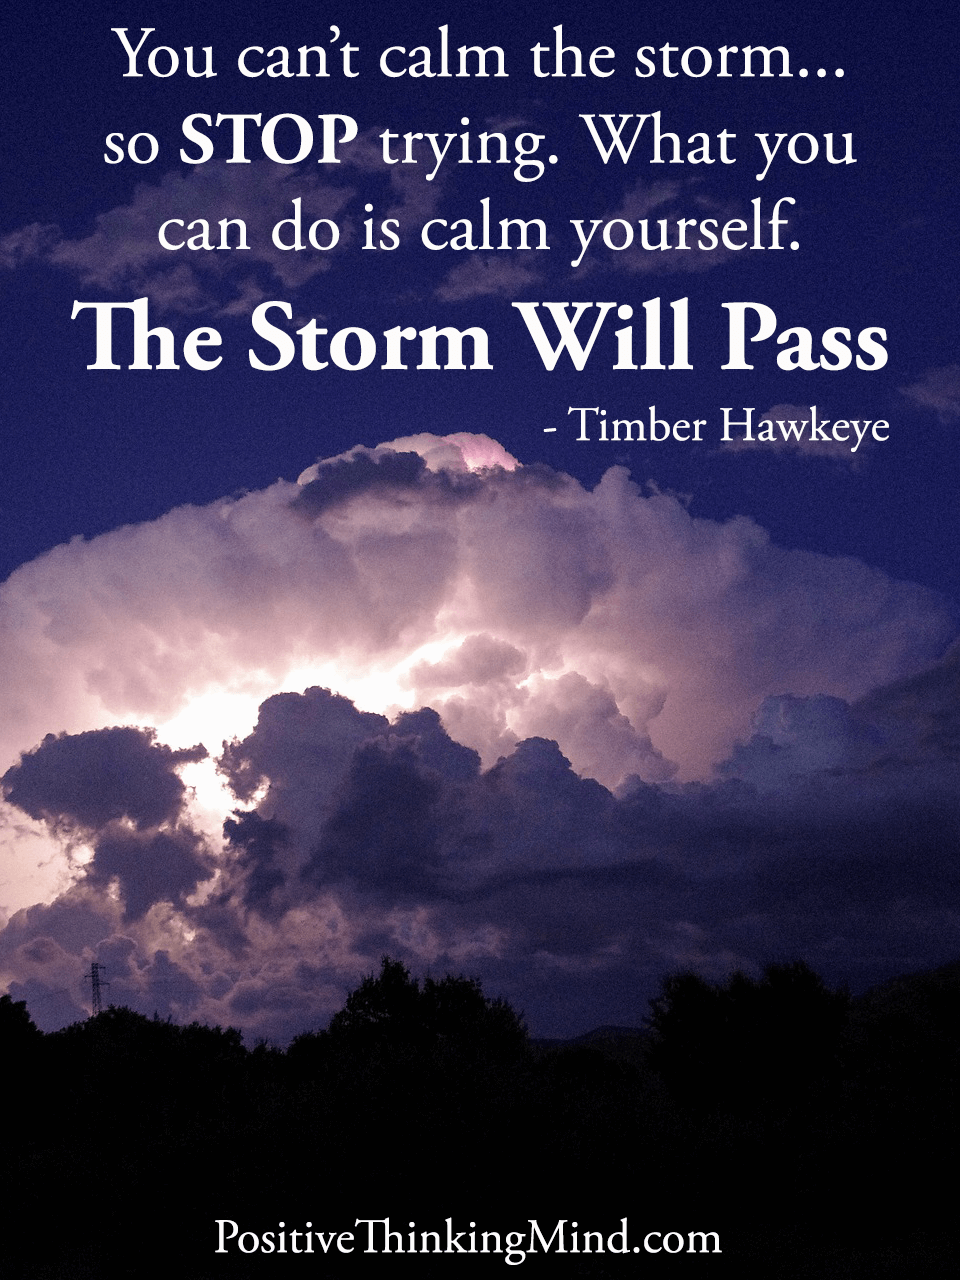 You can't calm the storm so STOP trying - Timber Hawkeye 